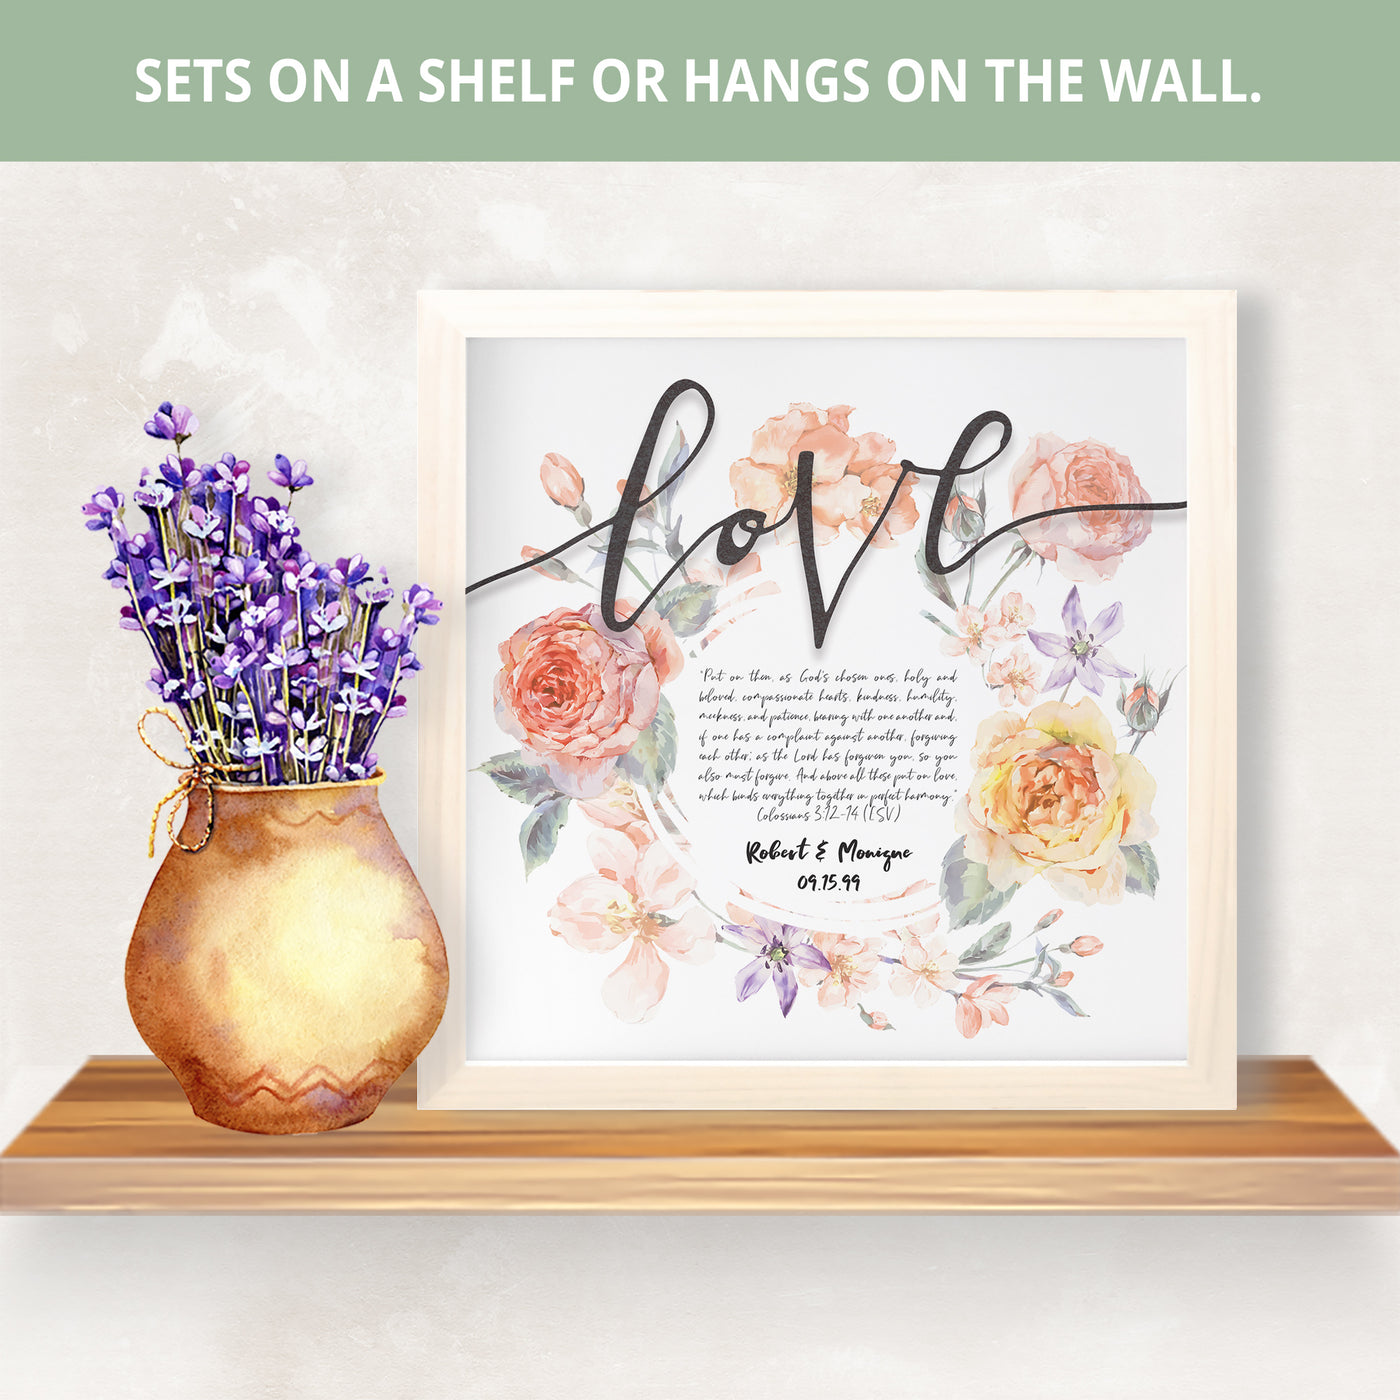 Love Is | Personalized Wedding, Anniversary, Love Gift, Print, Wall Decor